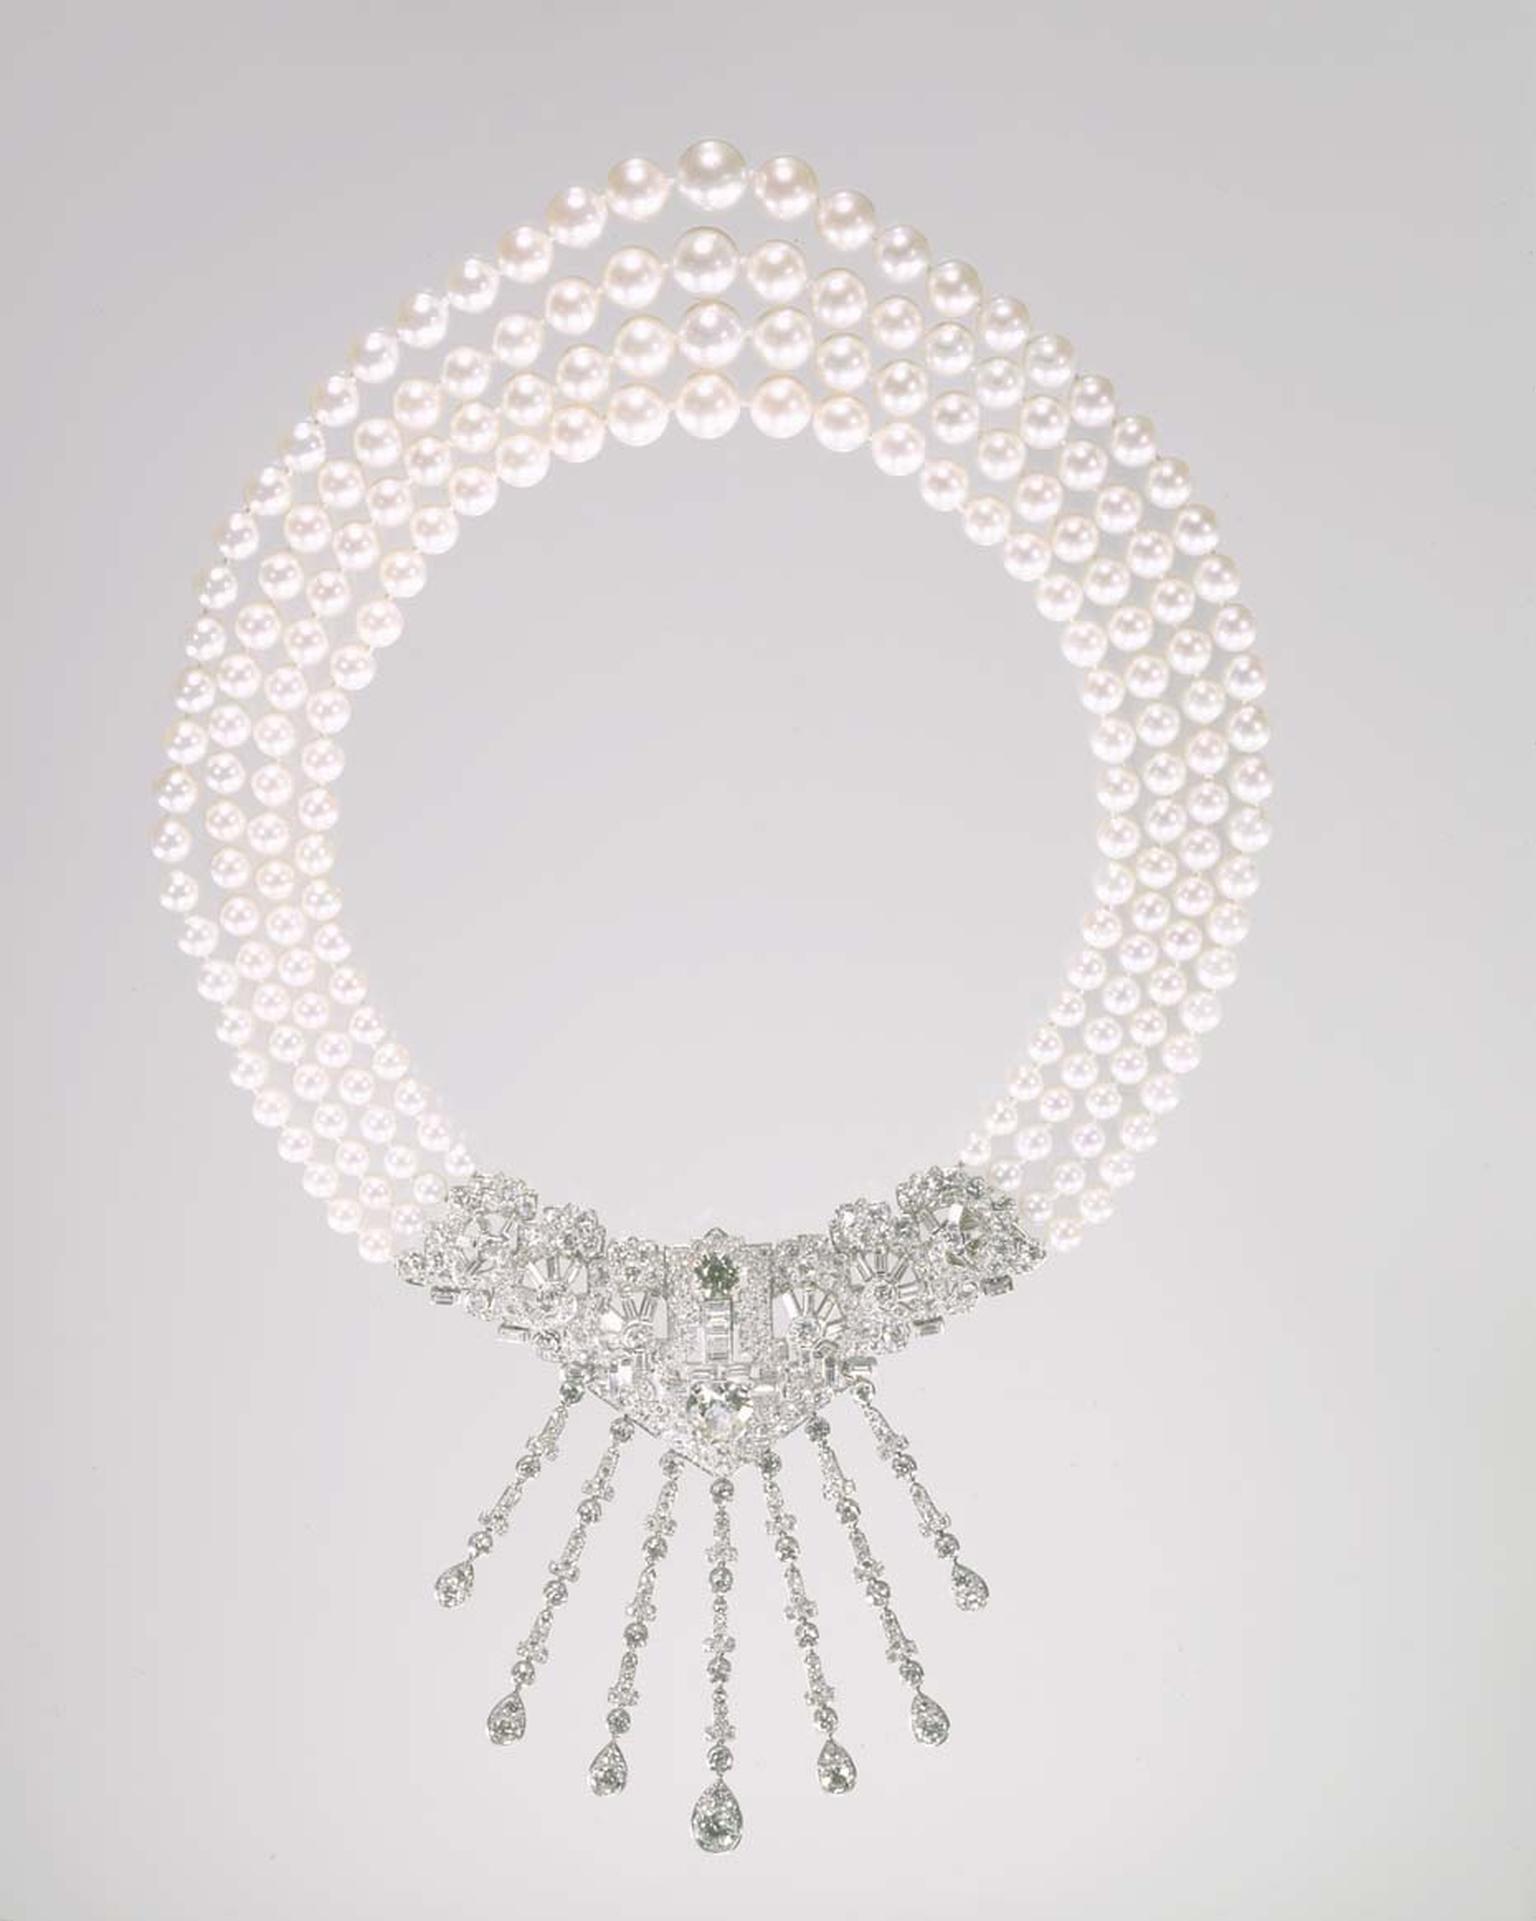 The 1963 Cartier three-strand Caro Yamaoka pearl necklace worn by Marjorie Merriweather Post in a photograph. Image: Courtesy Hillwood Estate, Museum and Gardens